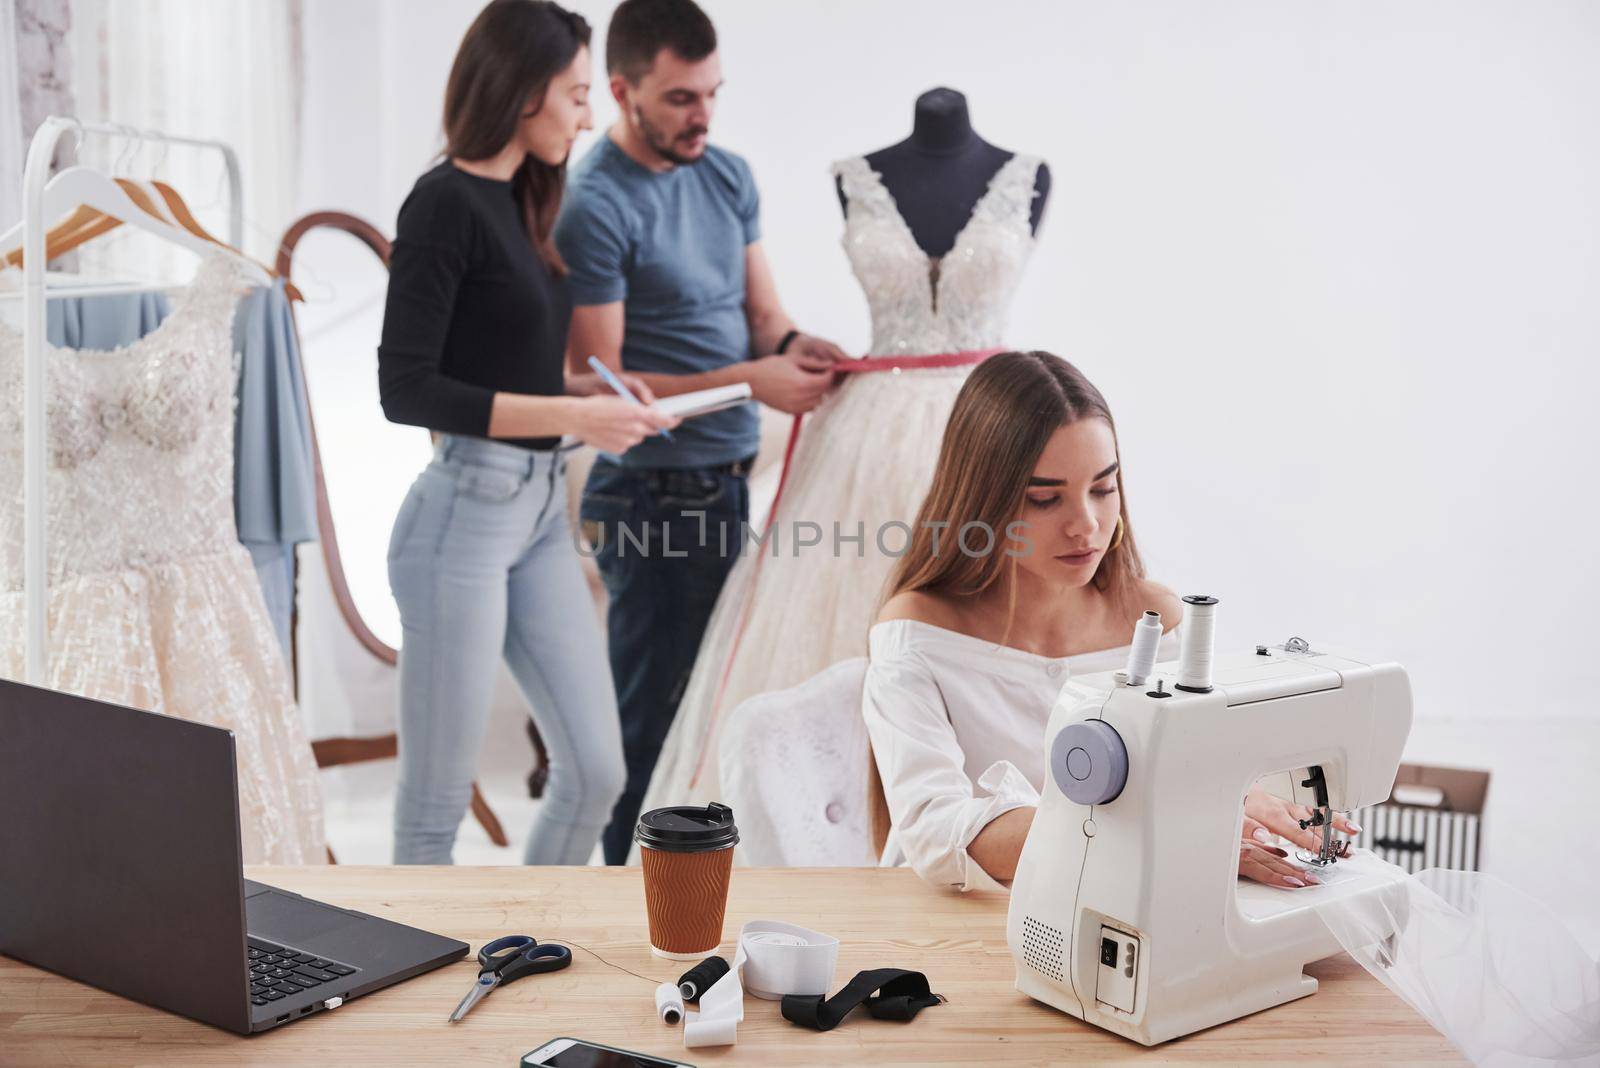 Girl and man measures dress. Female fashion designer works on the new clothes in the workshop with group of people behind.